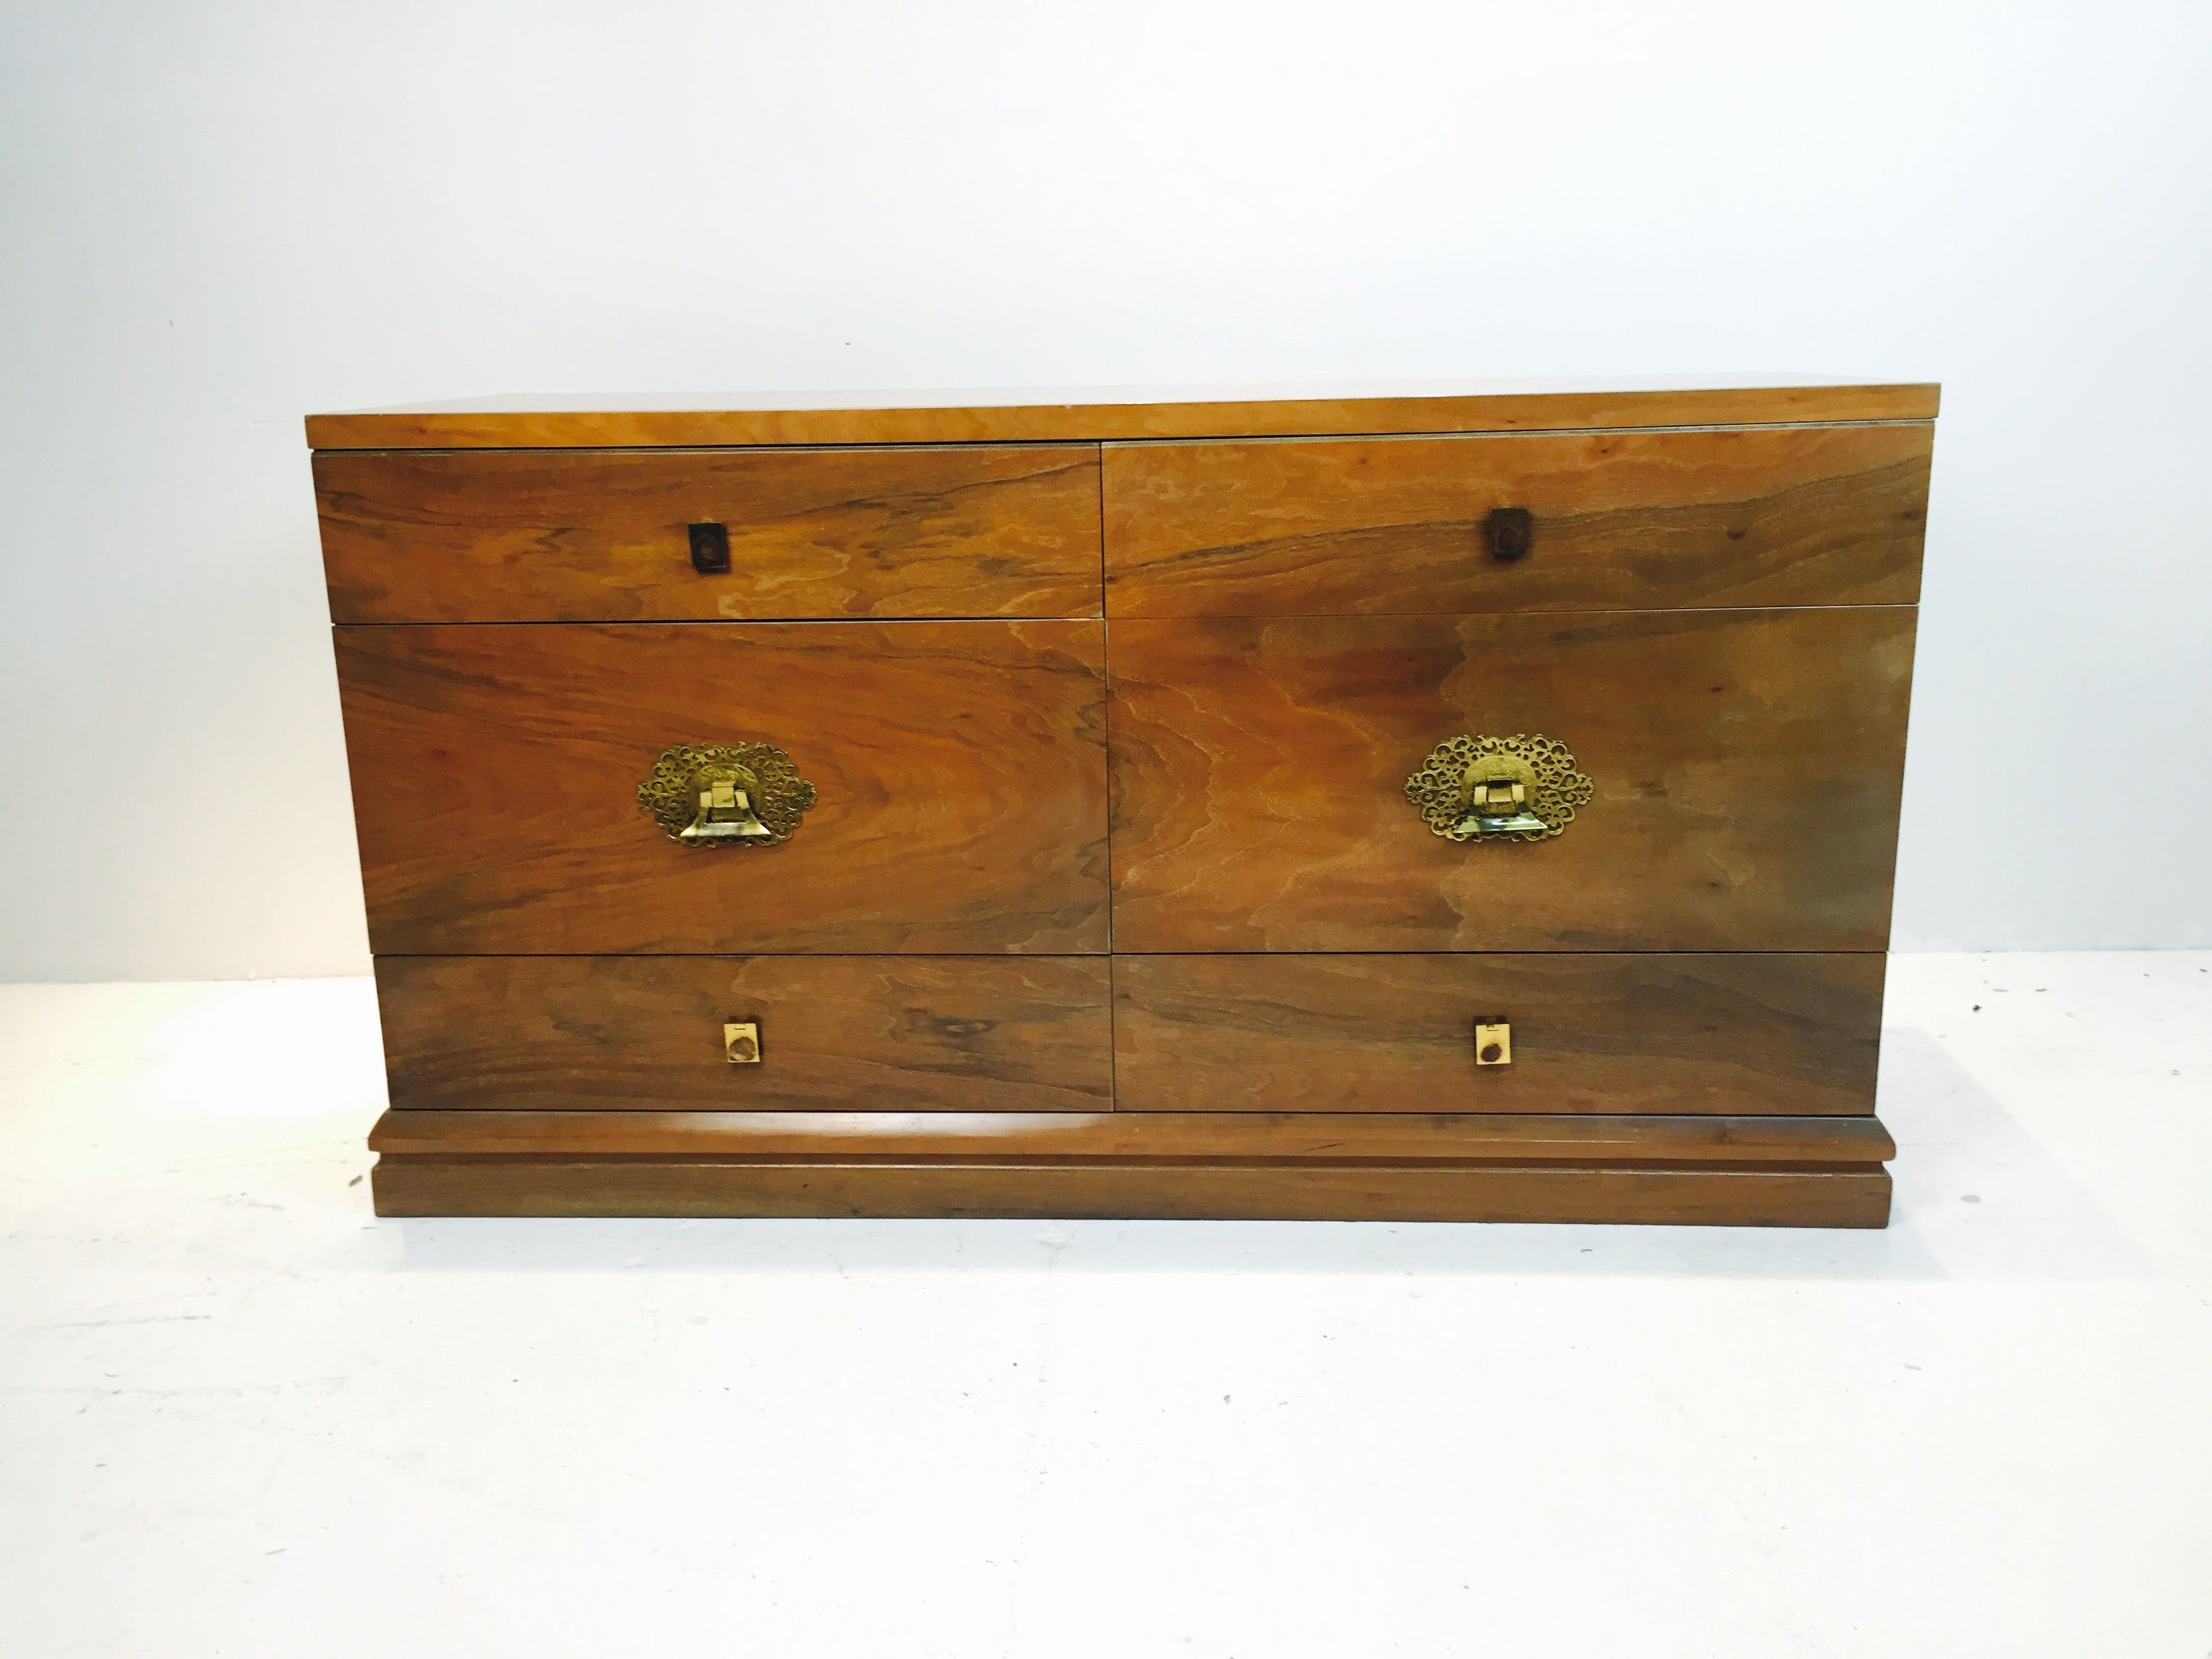 Six Drawer Dresserseiling Modern With Asian Influence With Regard To Seiling Sideboards (View 29 of 30)